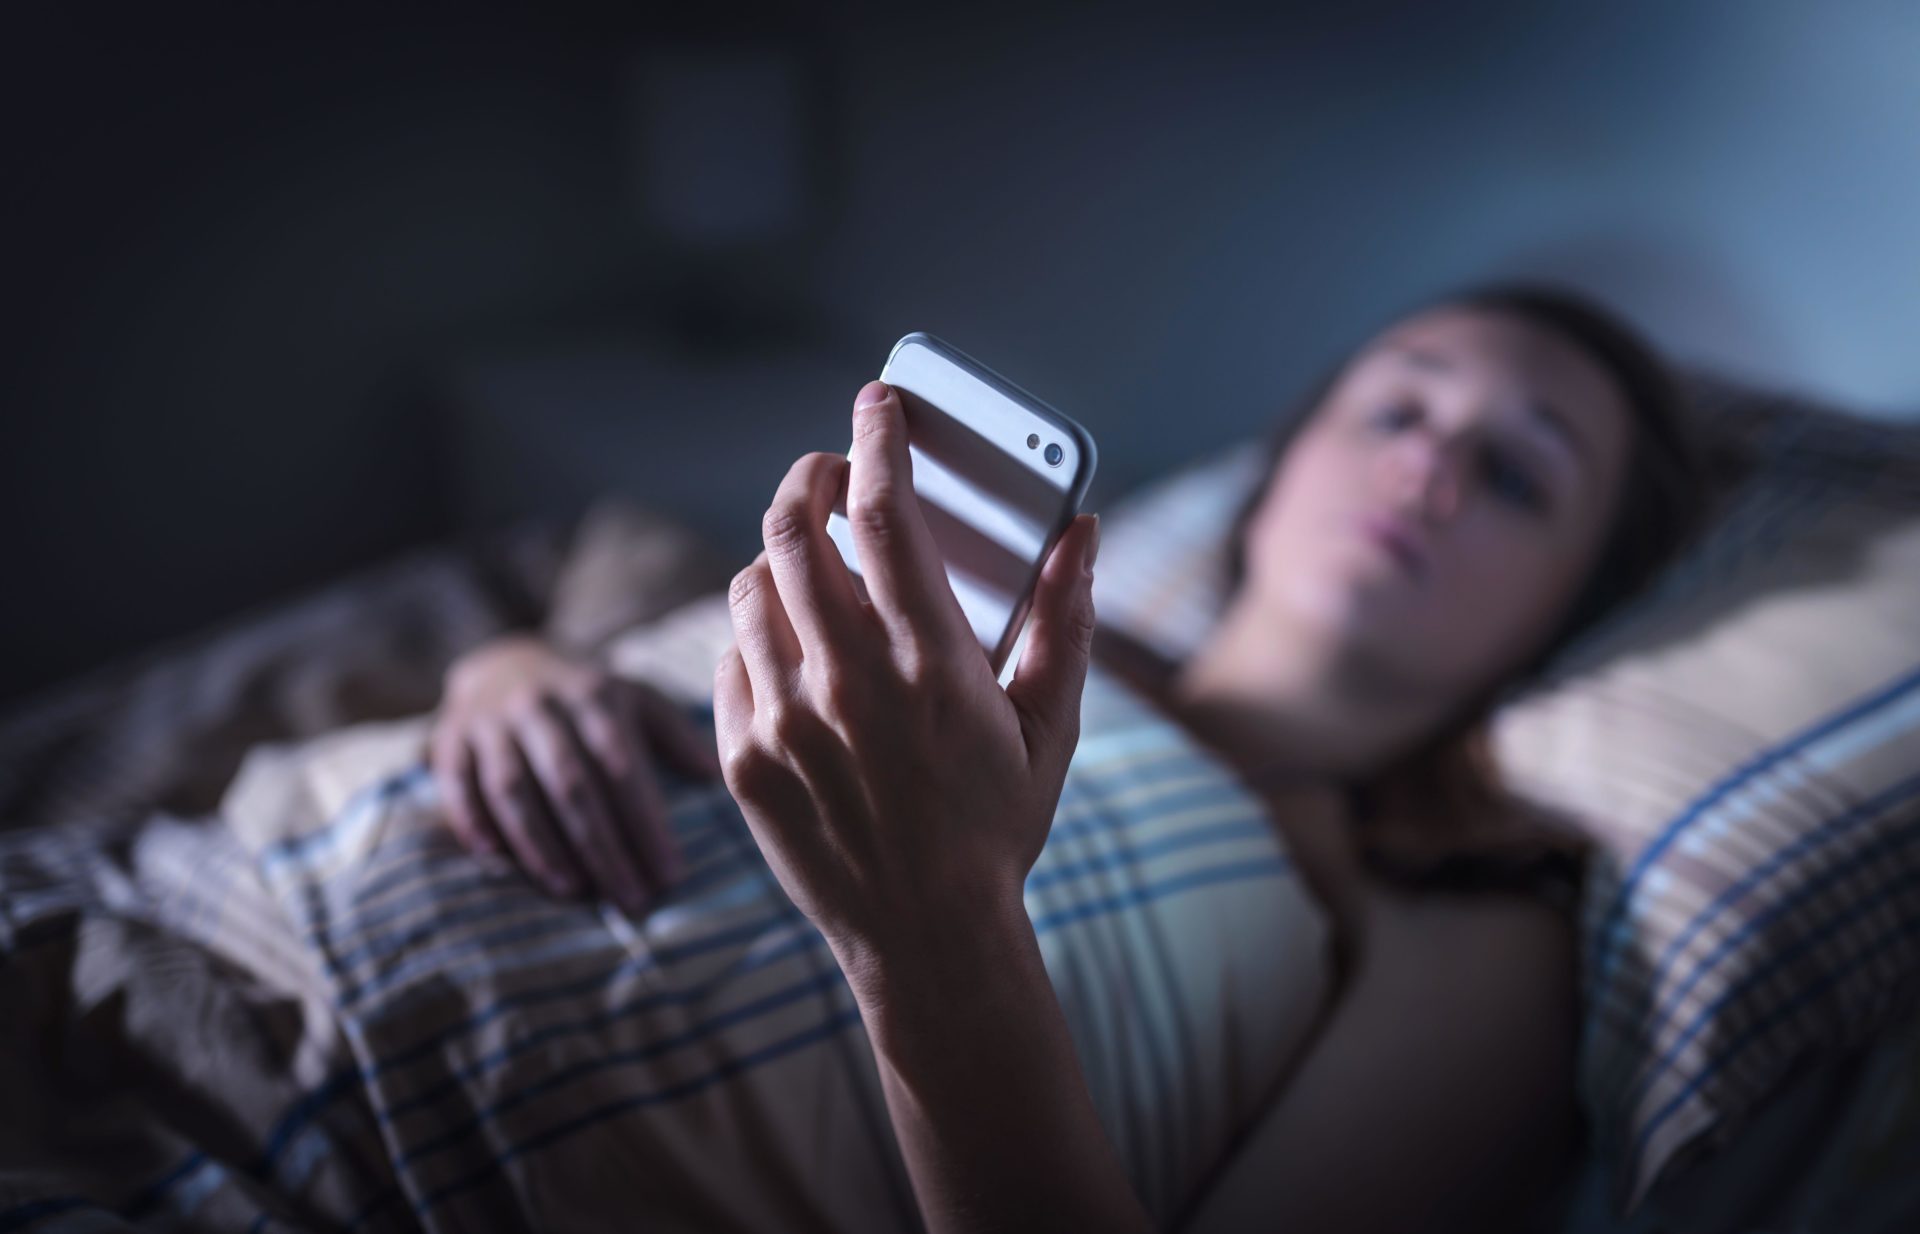 Woman looking at smartphone at night in bed. Image: Tero Vesalainen / Alamy